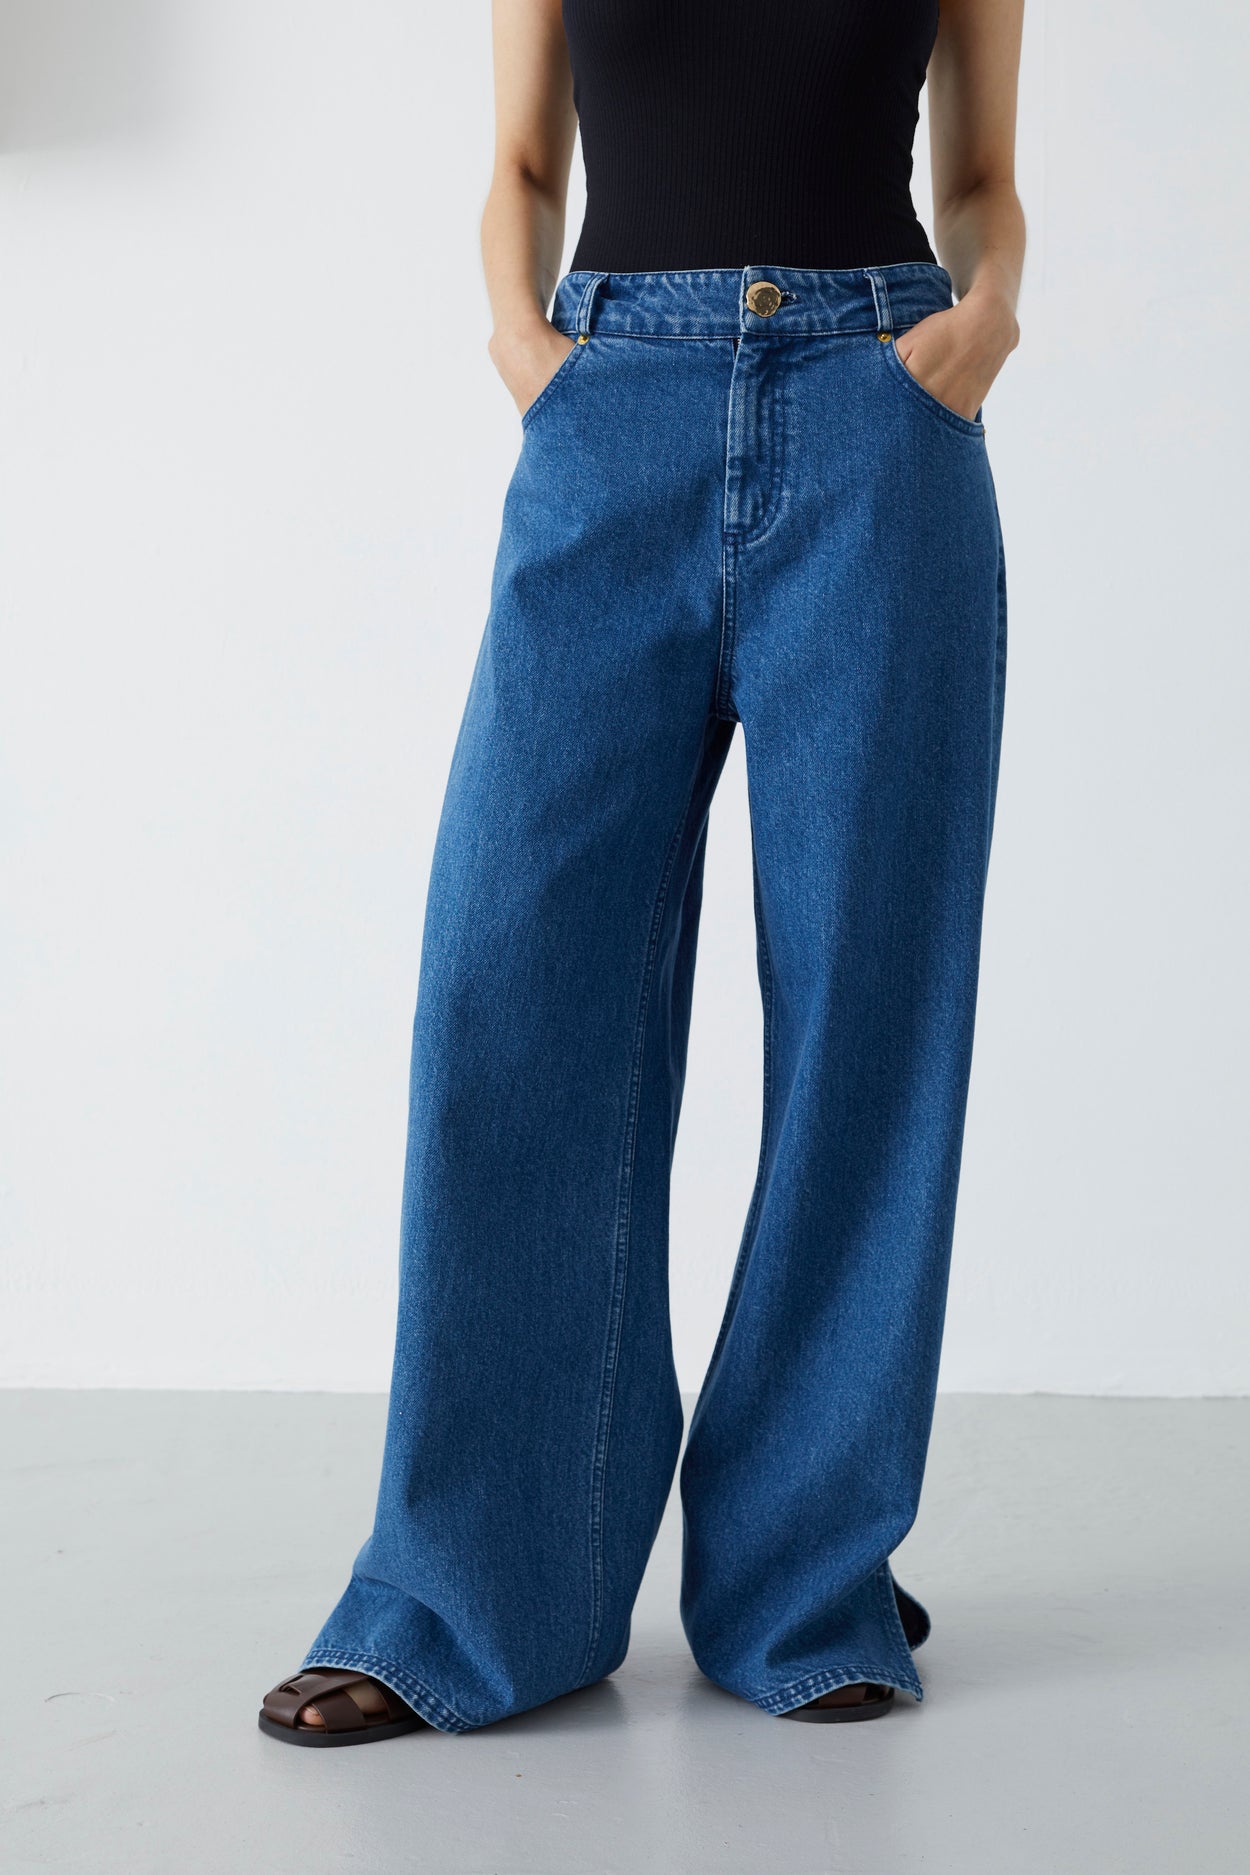 MOTHER The Fly Cut Tomcat Roller High-Rise Wide-Leg Jeans | Anthropologie  Singapore - Women's Clothing, Accessories & Home